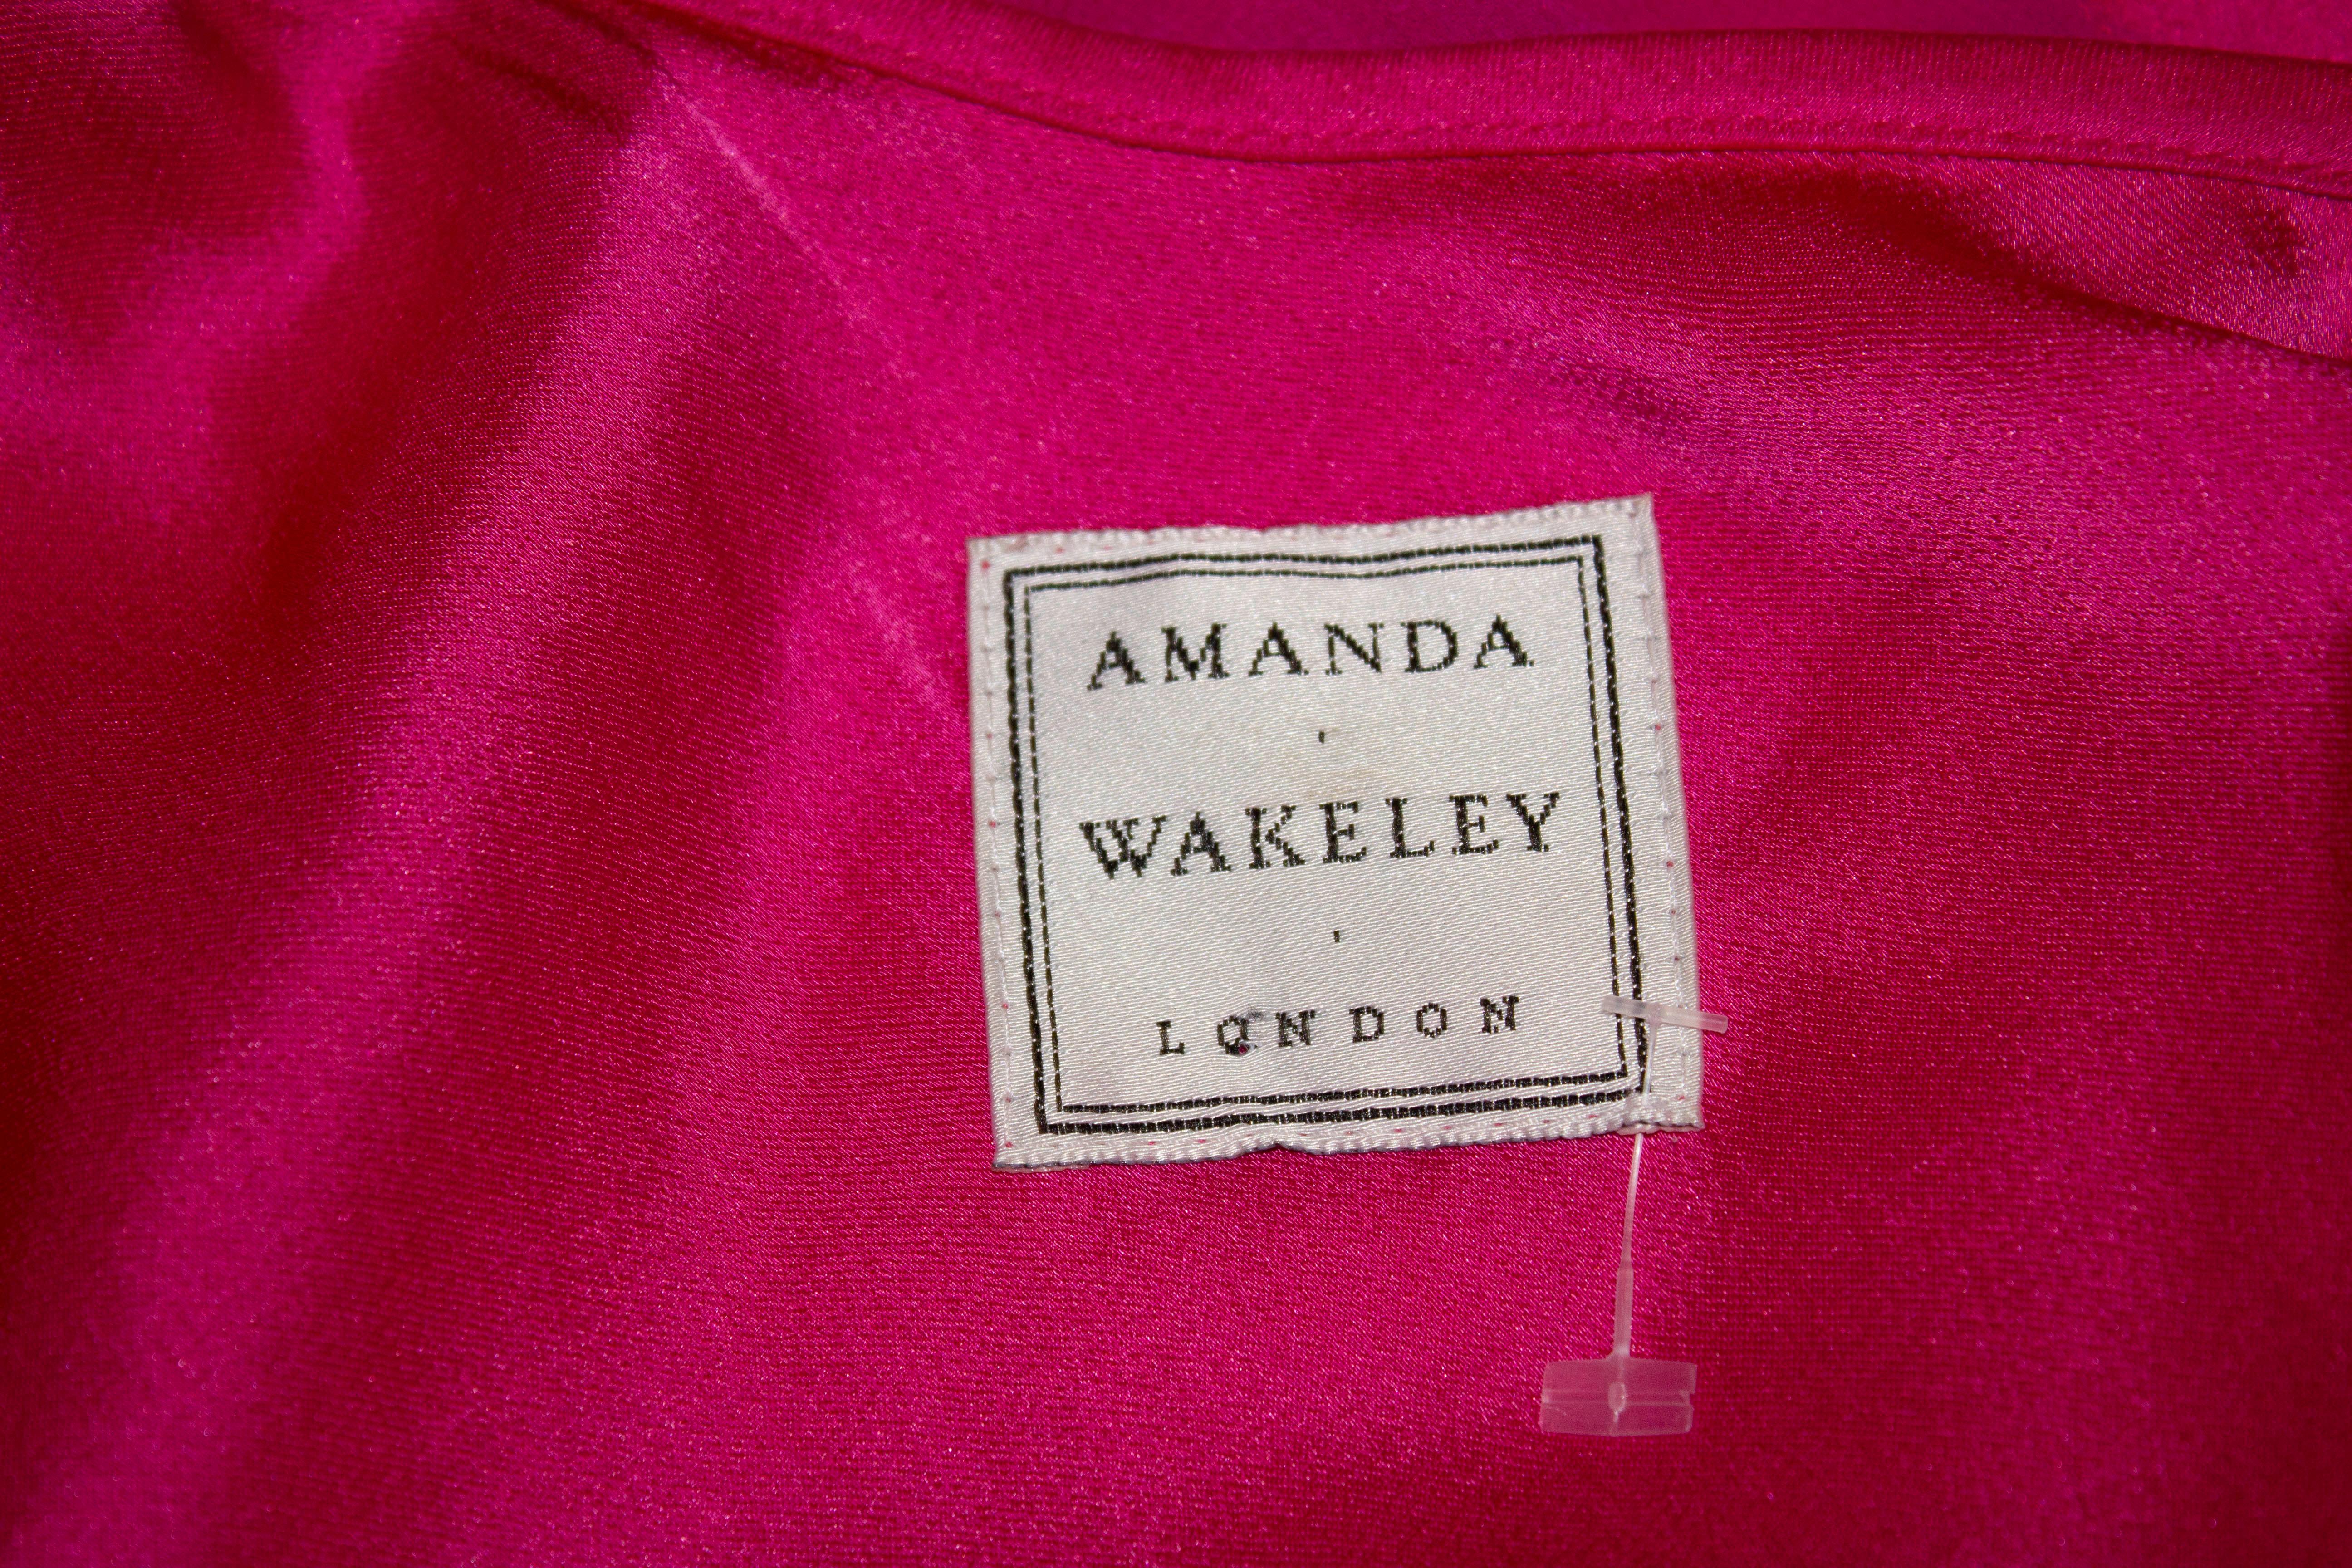 A head turning evening gown by Amanda Wakeley . In a pink silk with embellishment the gown has a cowl neckline, deep back , spaggeti straps and embroidery detail.
Measurements: Bust 36'', length 59''